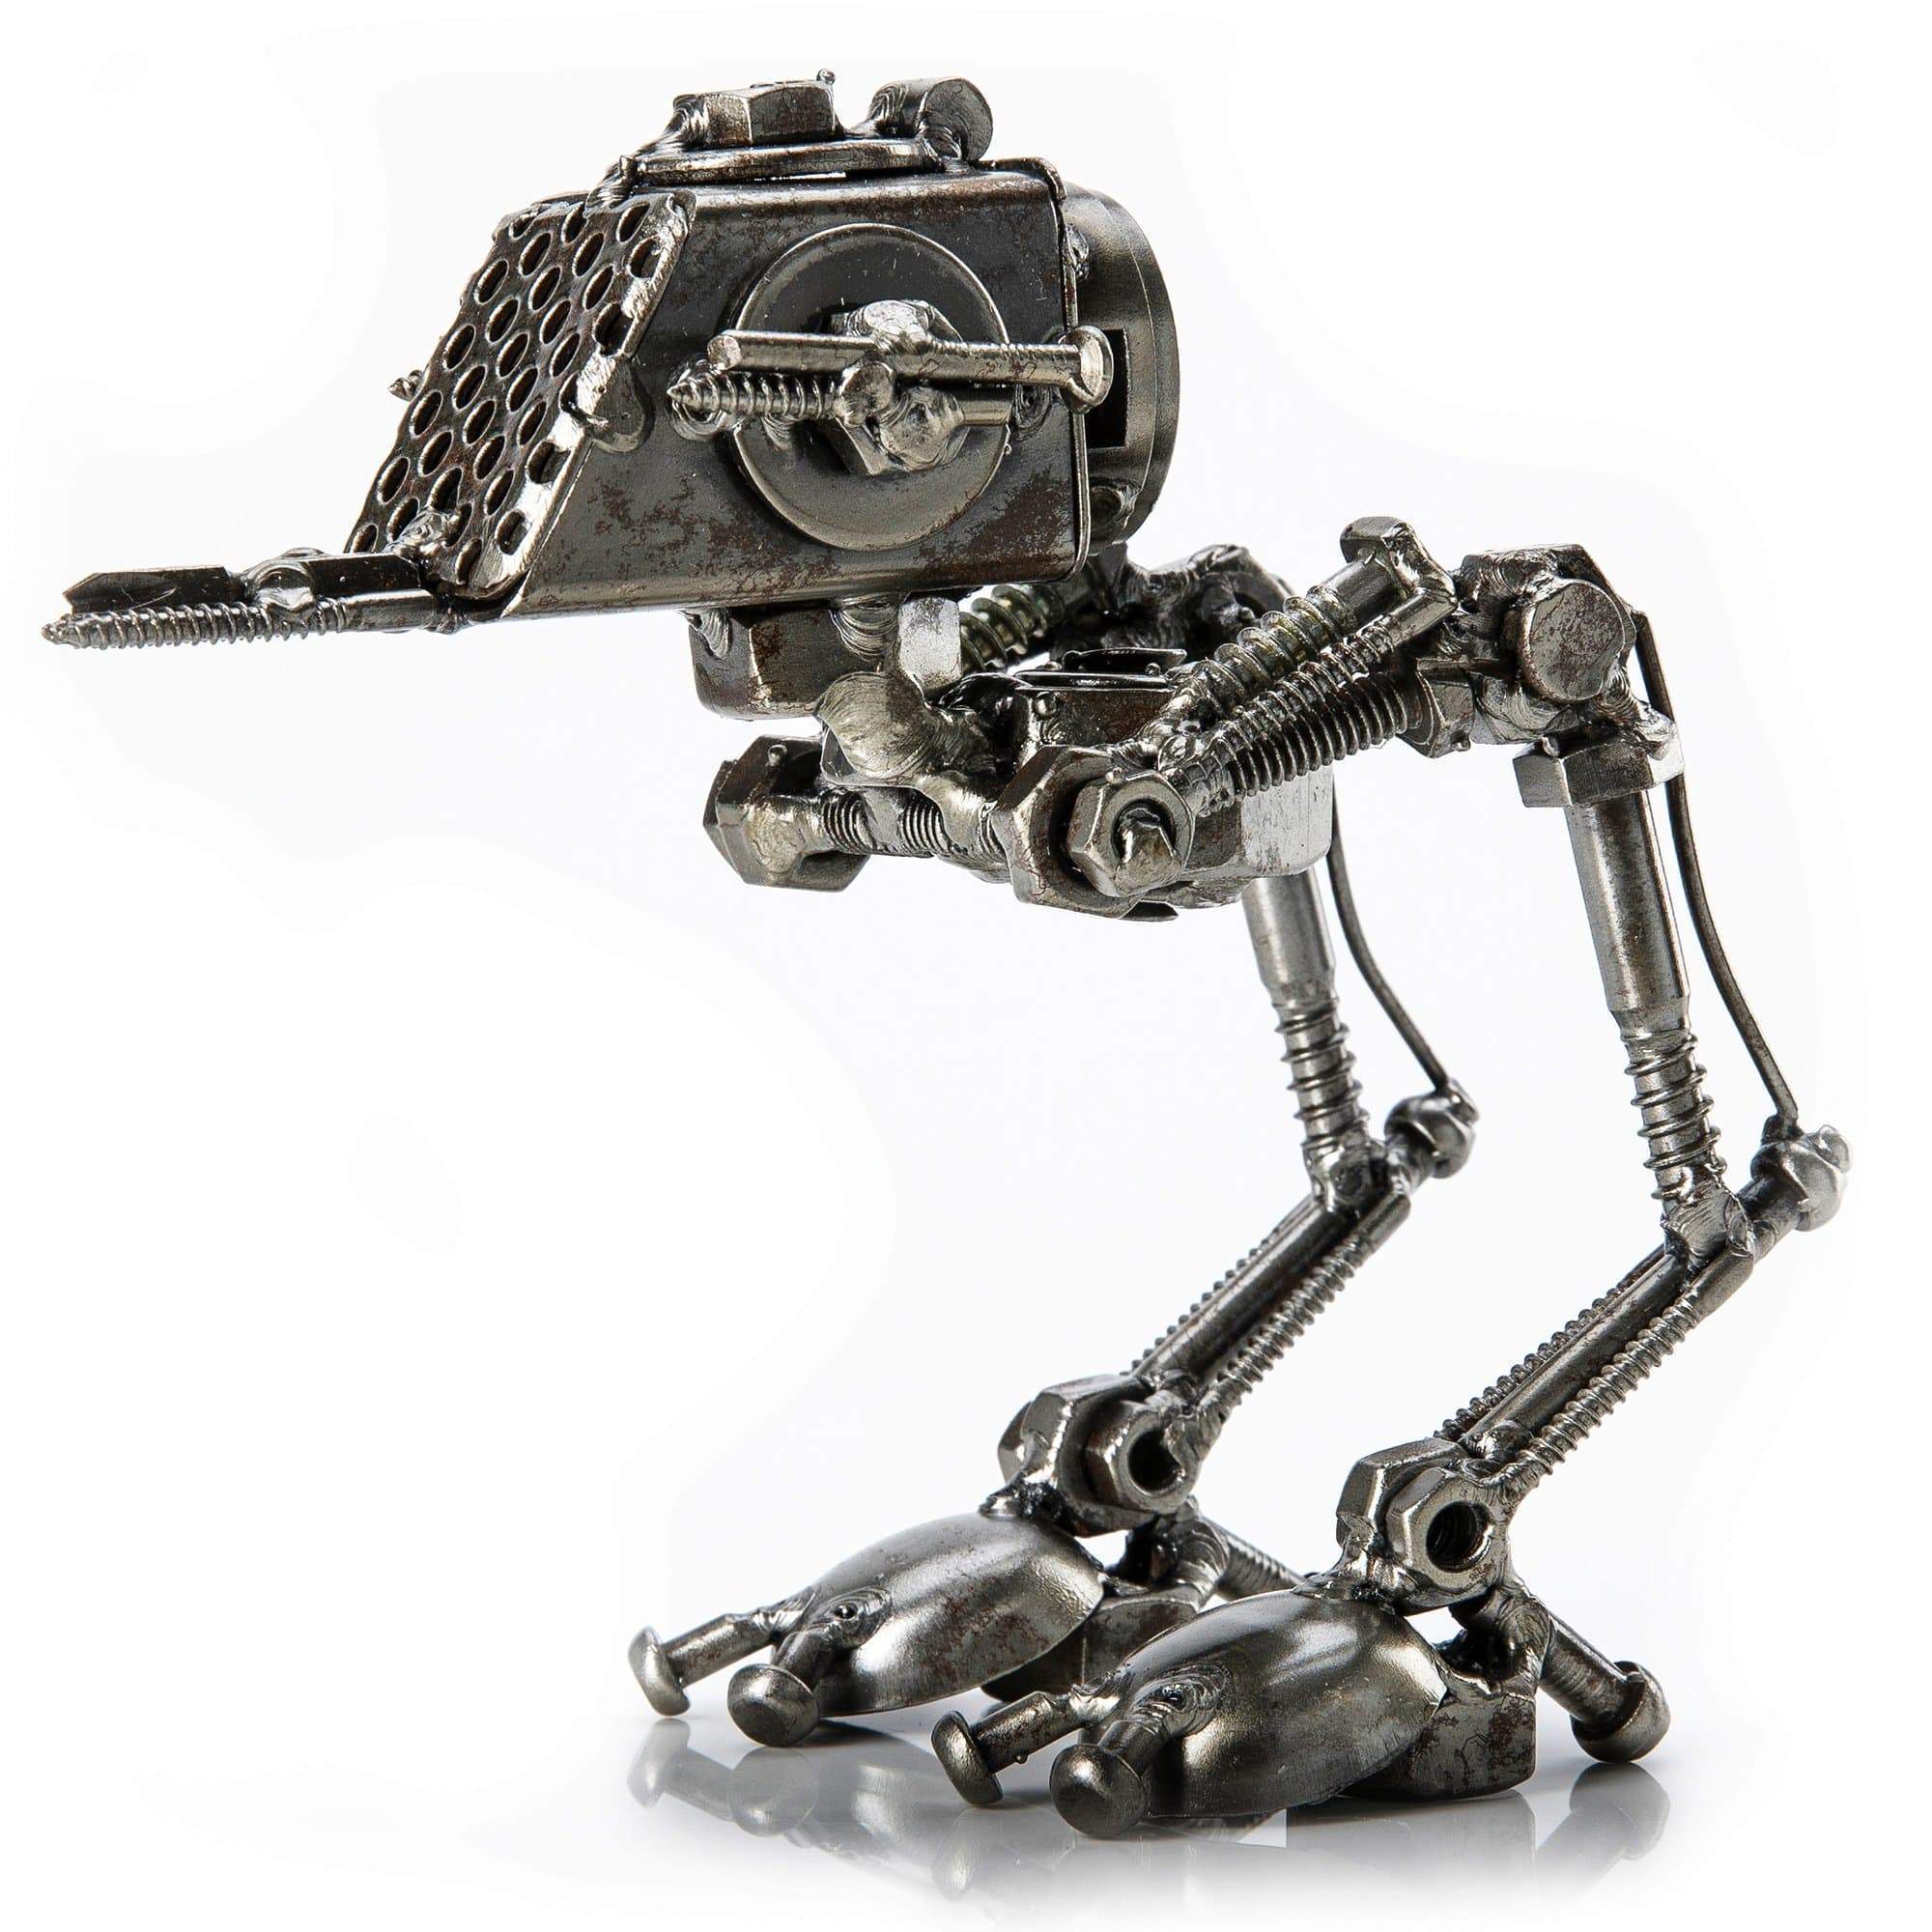 Kalifano Recycled Metal Art AT-ST Inspired Recycled Metal Sculpture RMS-400ATST-N